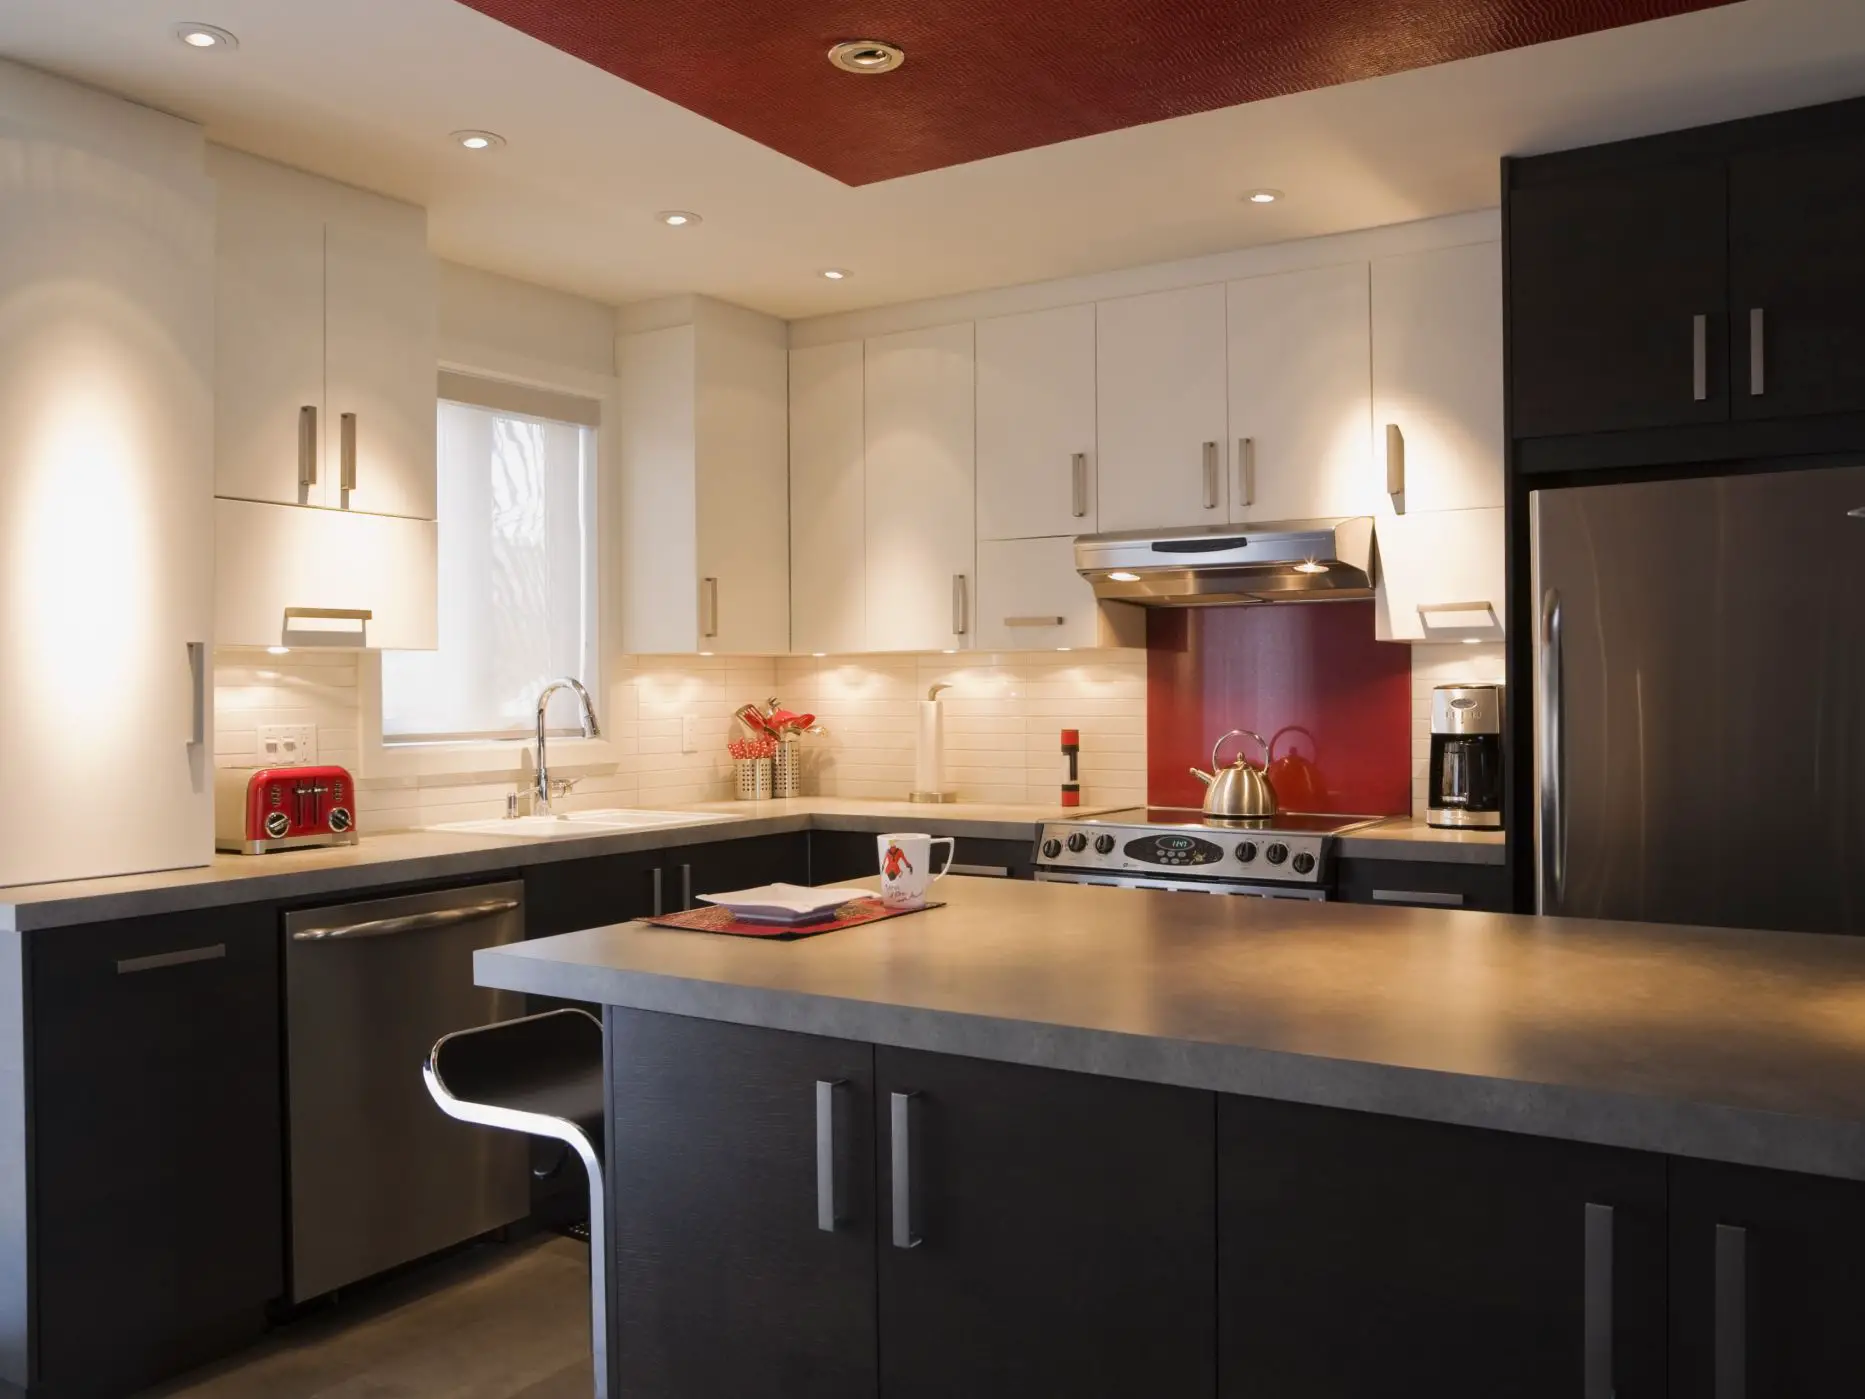 An ideal kitchen standard with a black and white color scheme and a red ceiling.